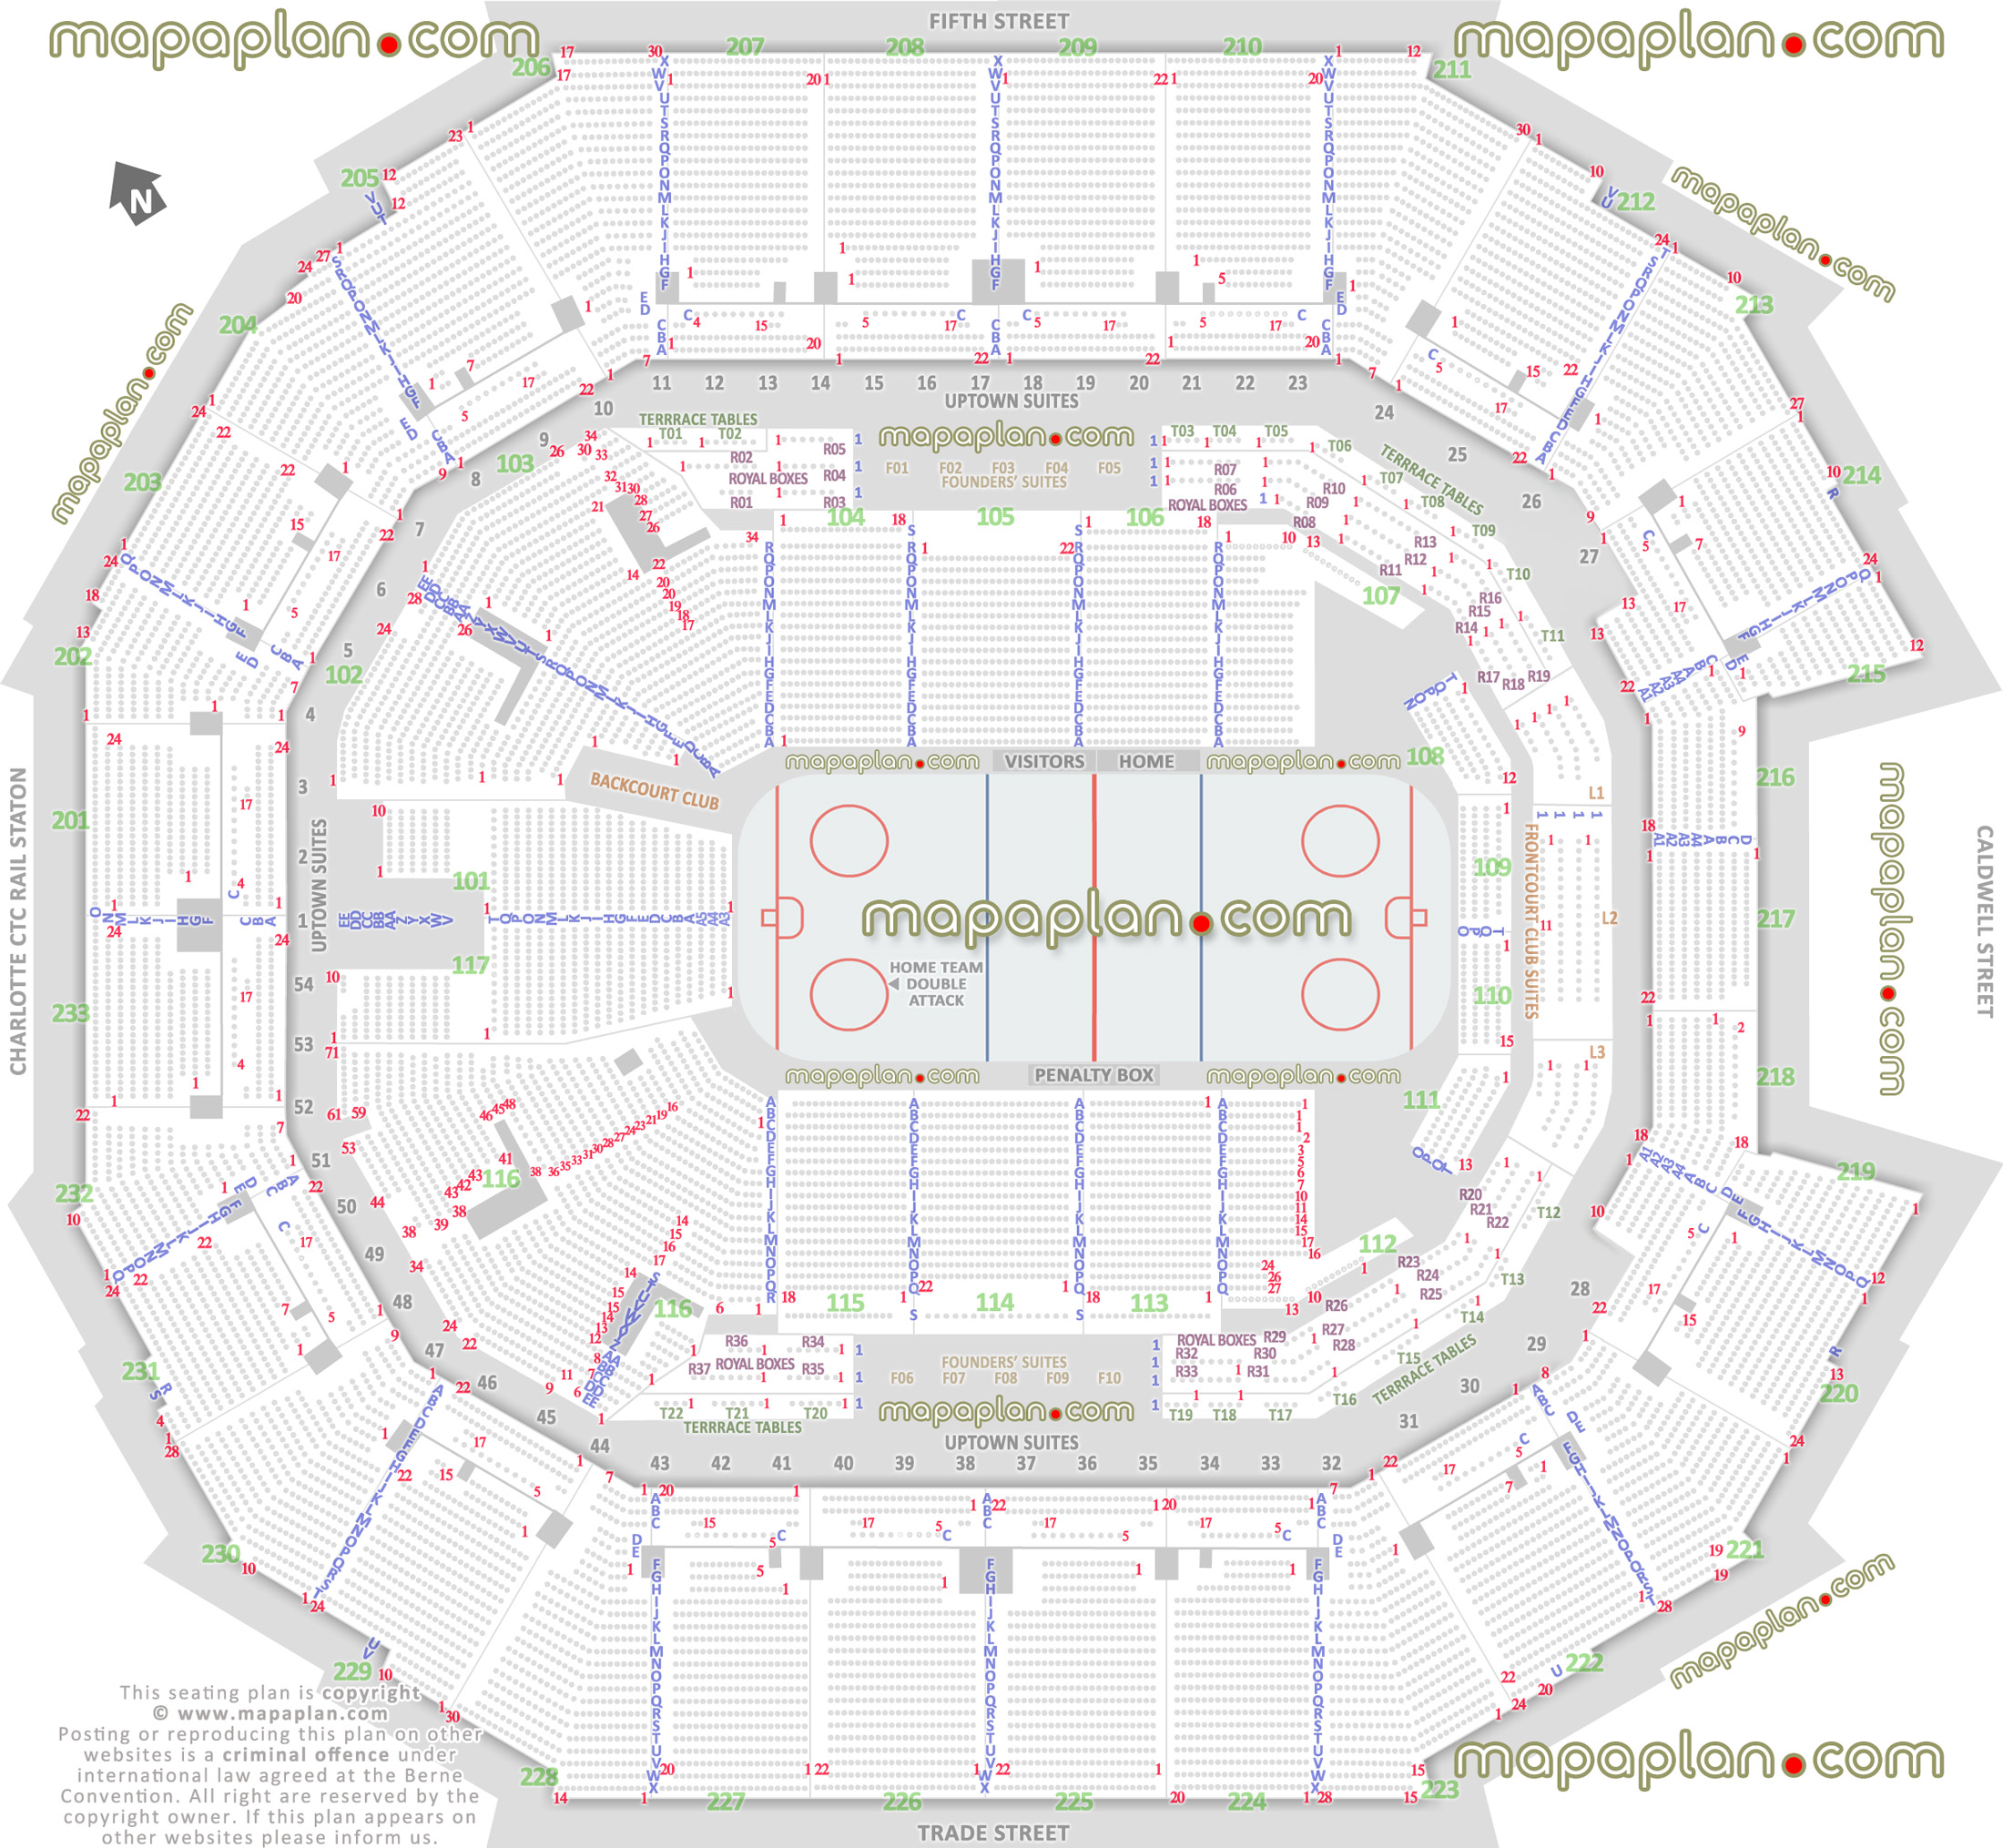 Time Warner Cable Arena Virtual Seating Chart